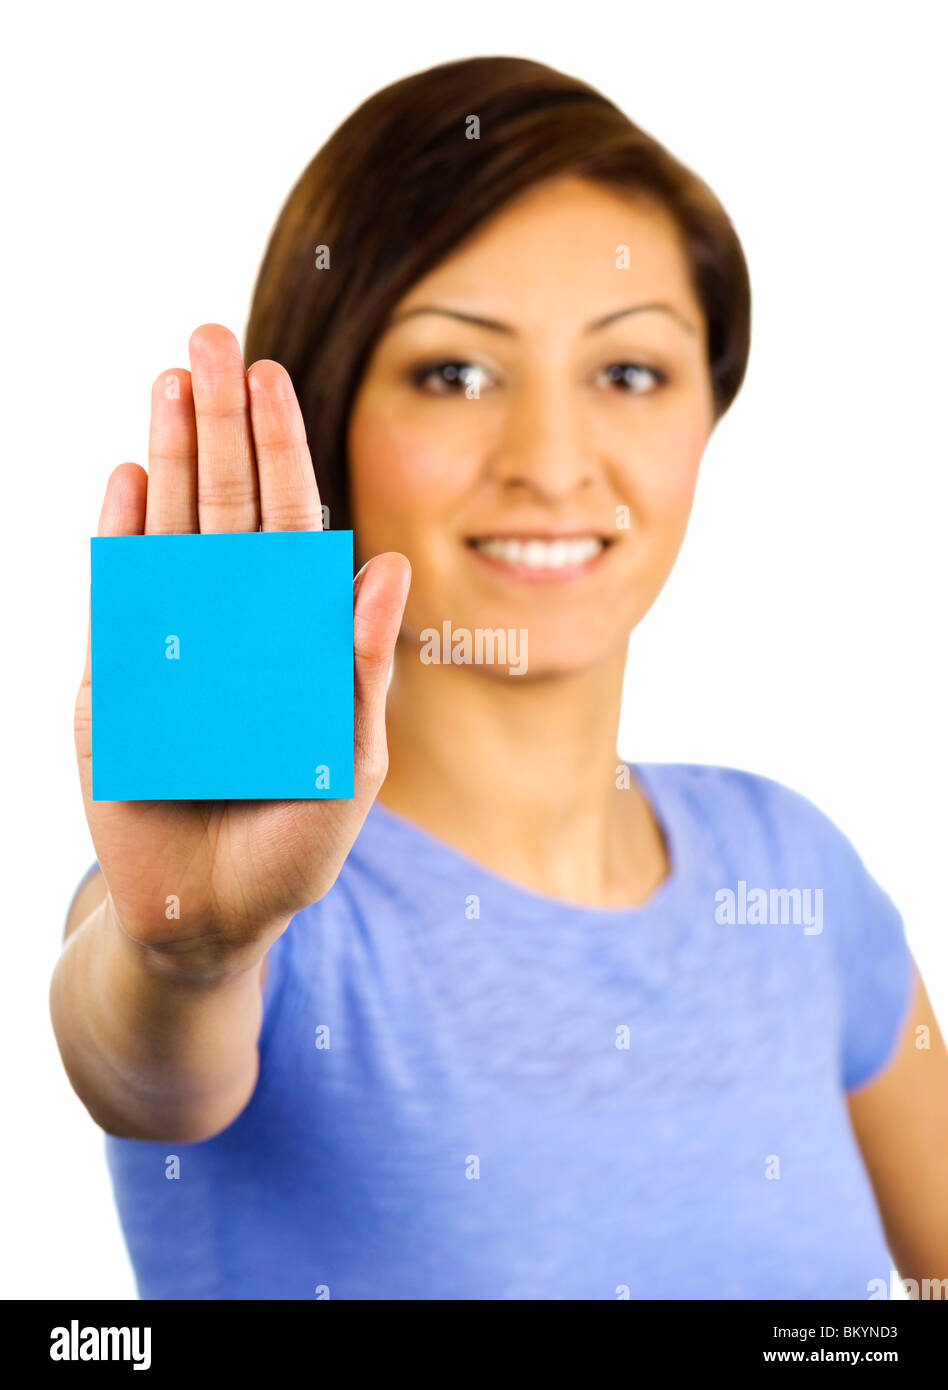 Young woman has a blue sticky note on the palm of her outstretched hand Stock Photo